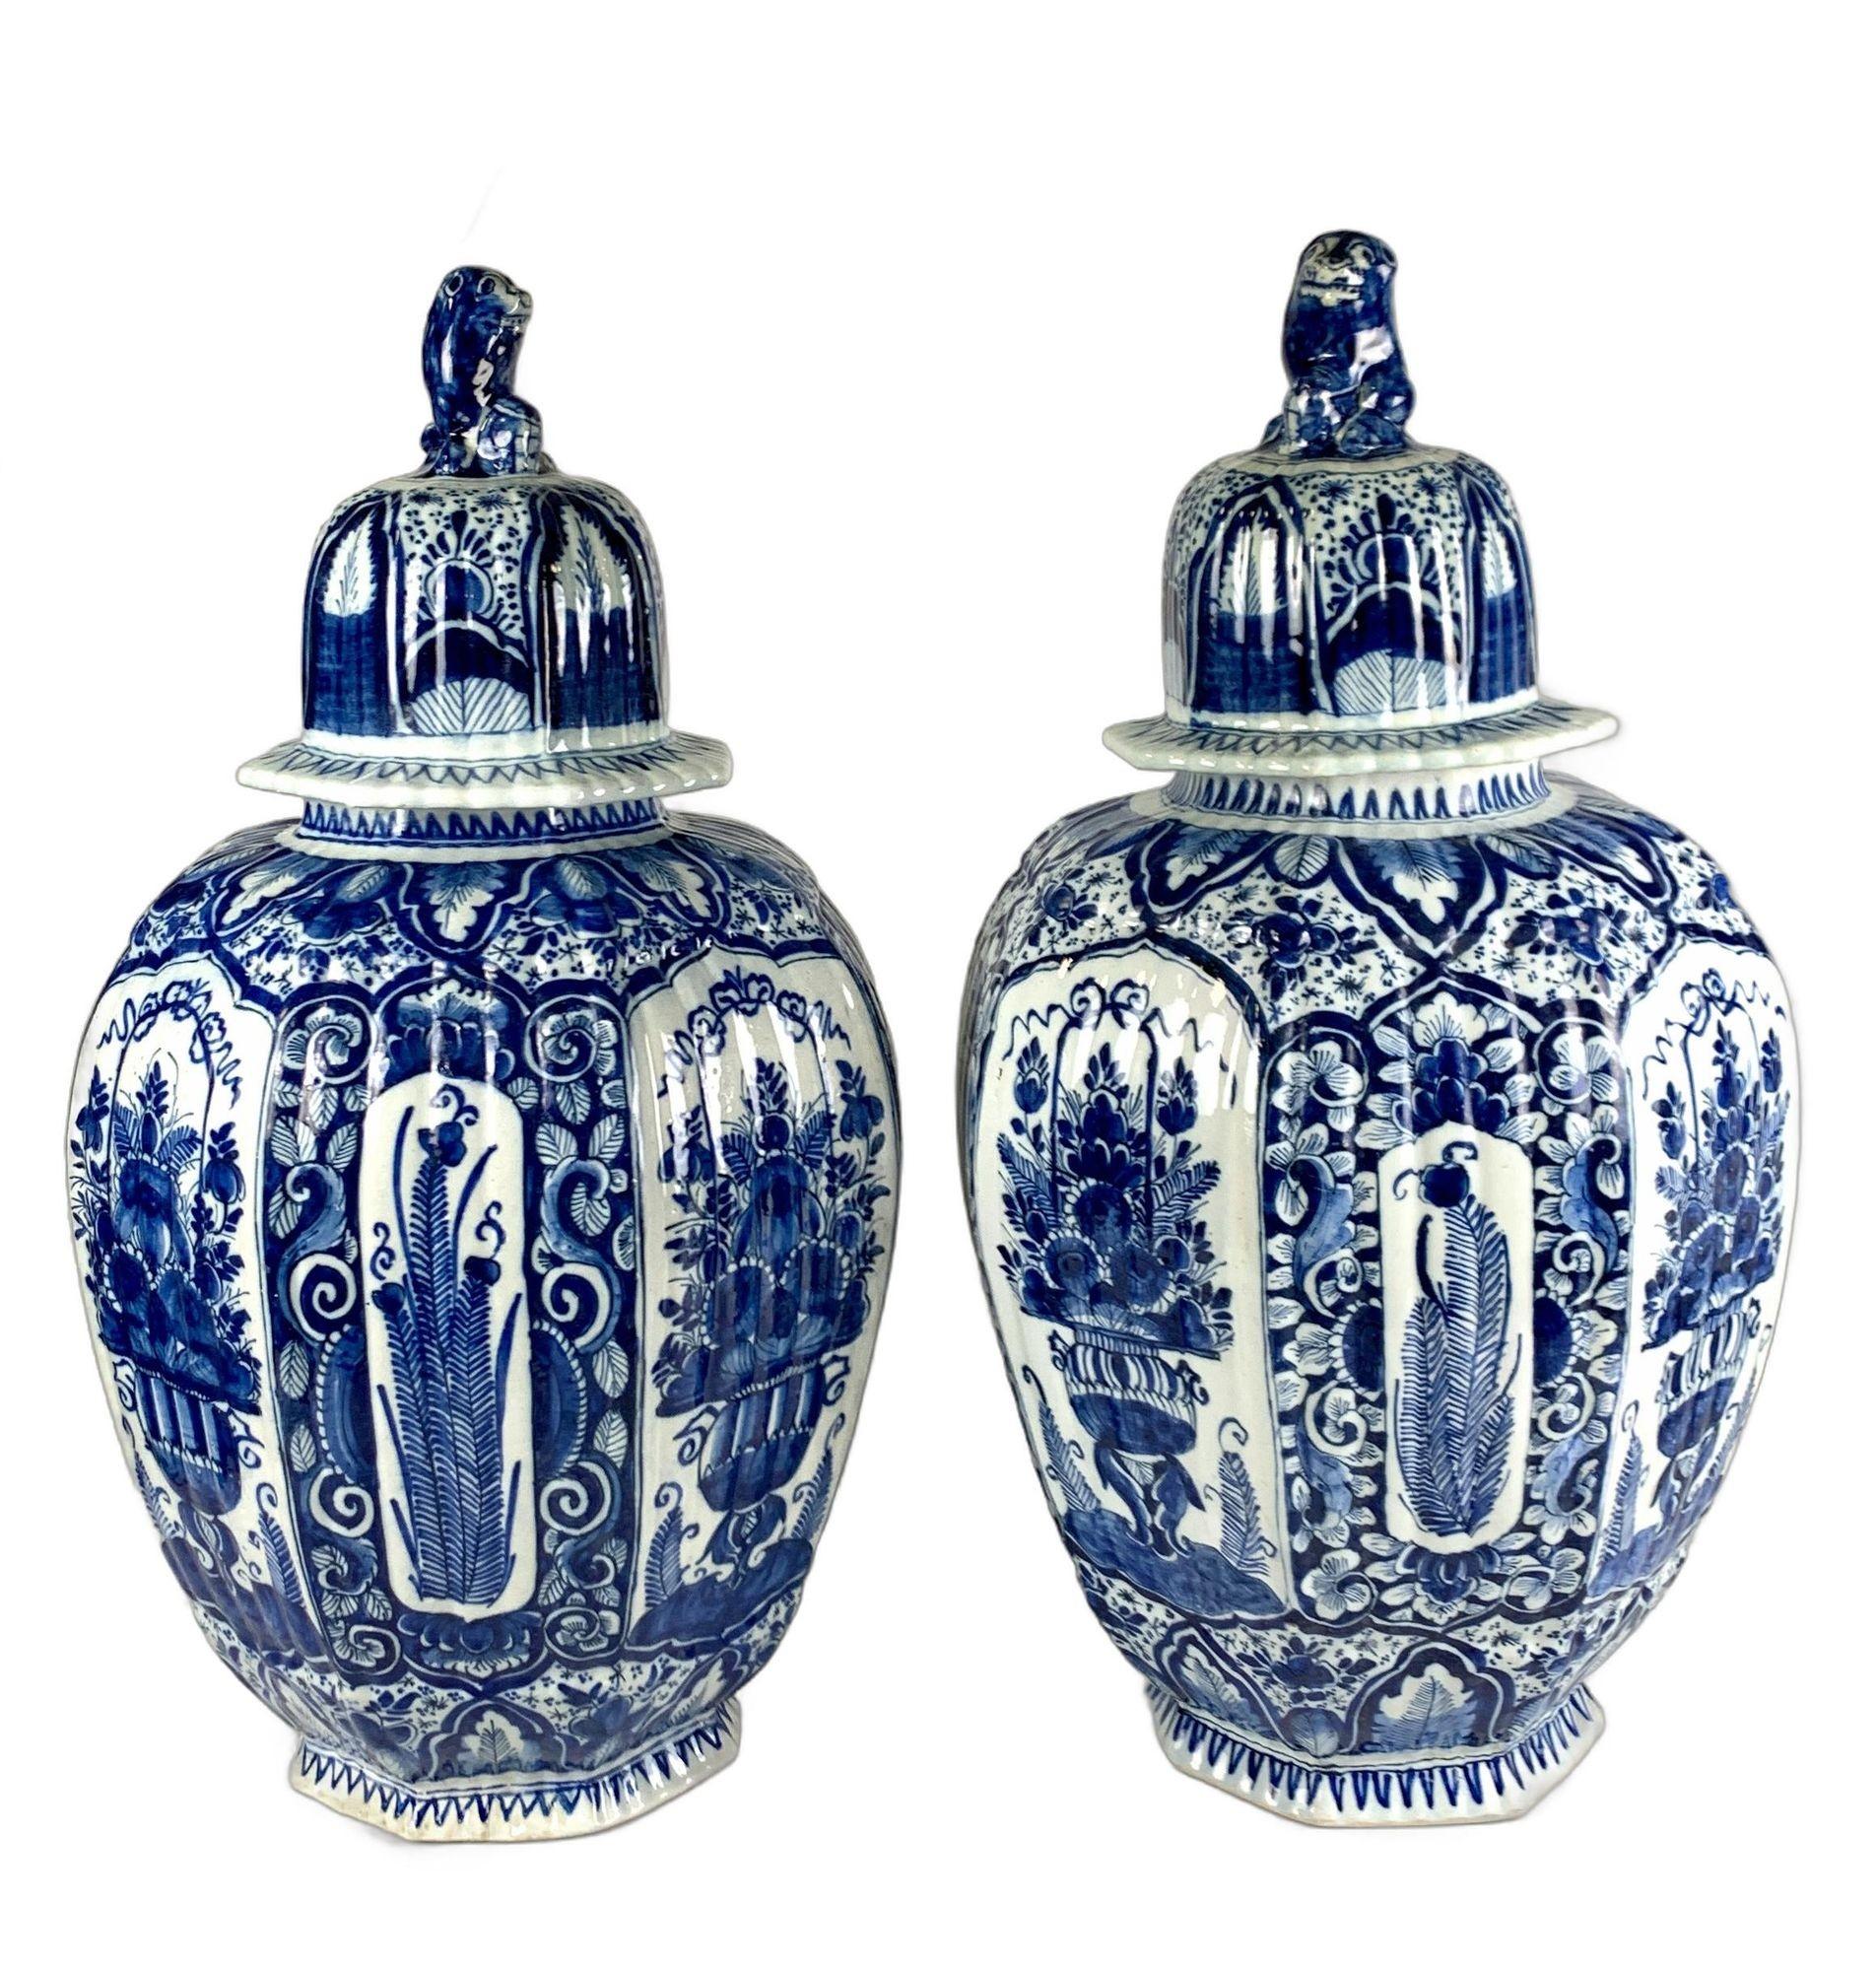 This large 18th-century pair of Dutch Delft jars is hand painted in traditional deep cobalt blue on a tin-glazed ground.
They are molded in the Delft octagonal shape with a fluted surface.
The fluting creates a beautiful effect as light reflects off